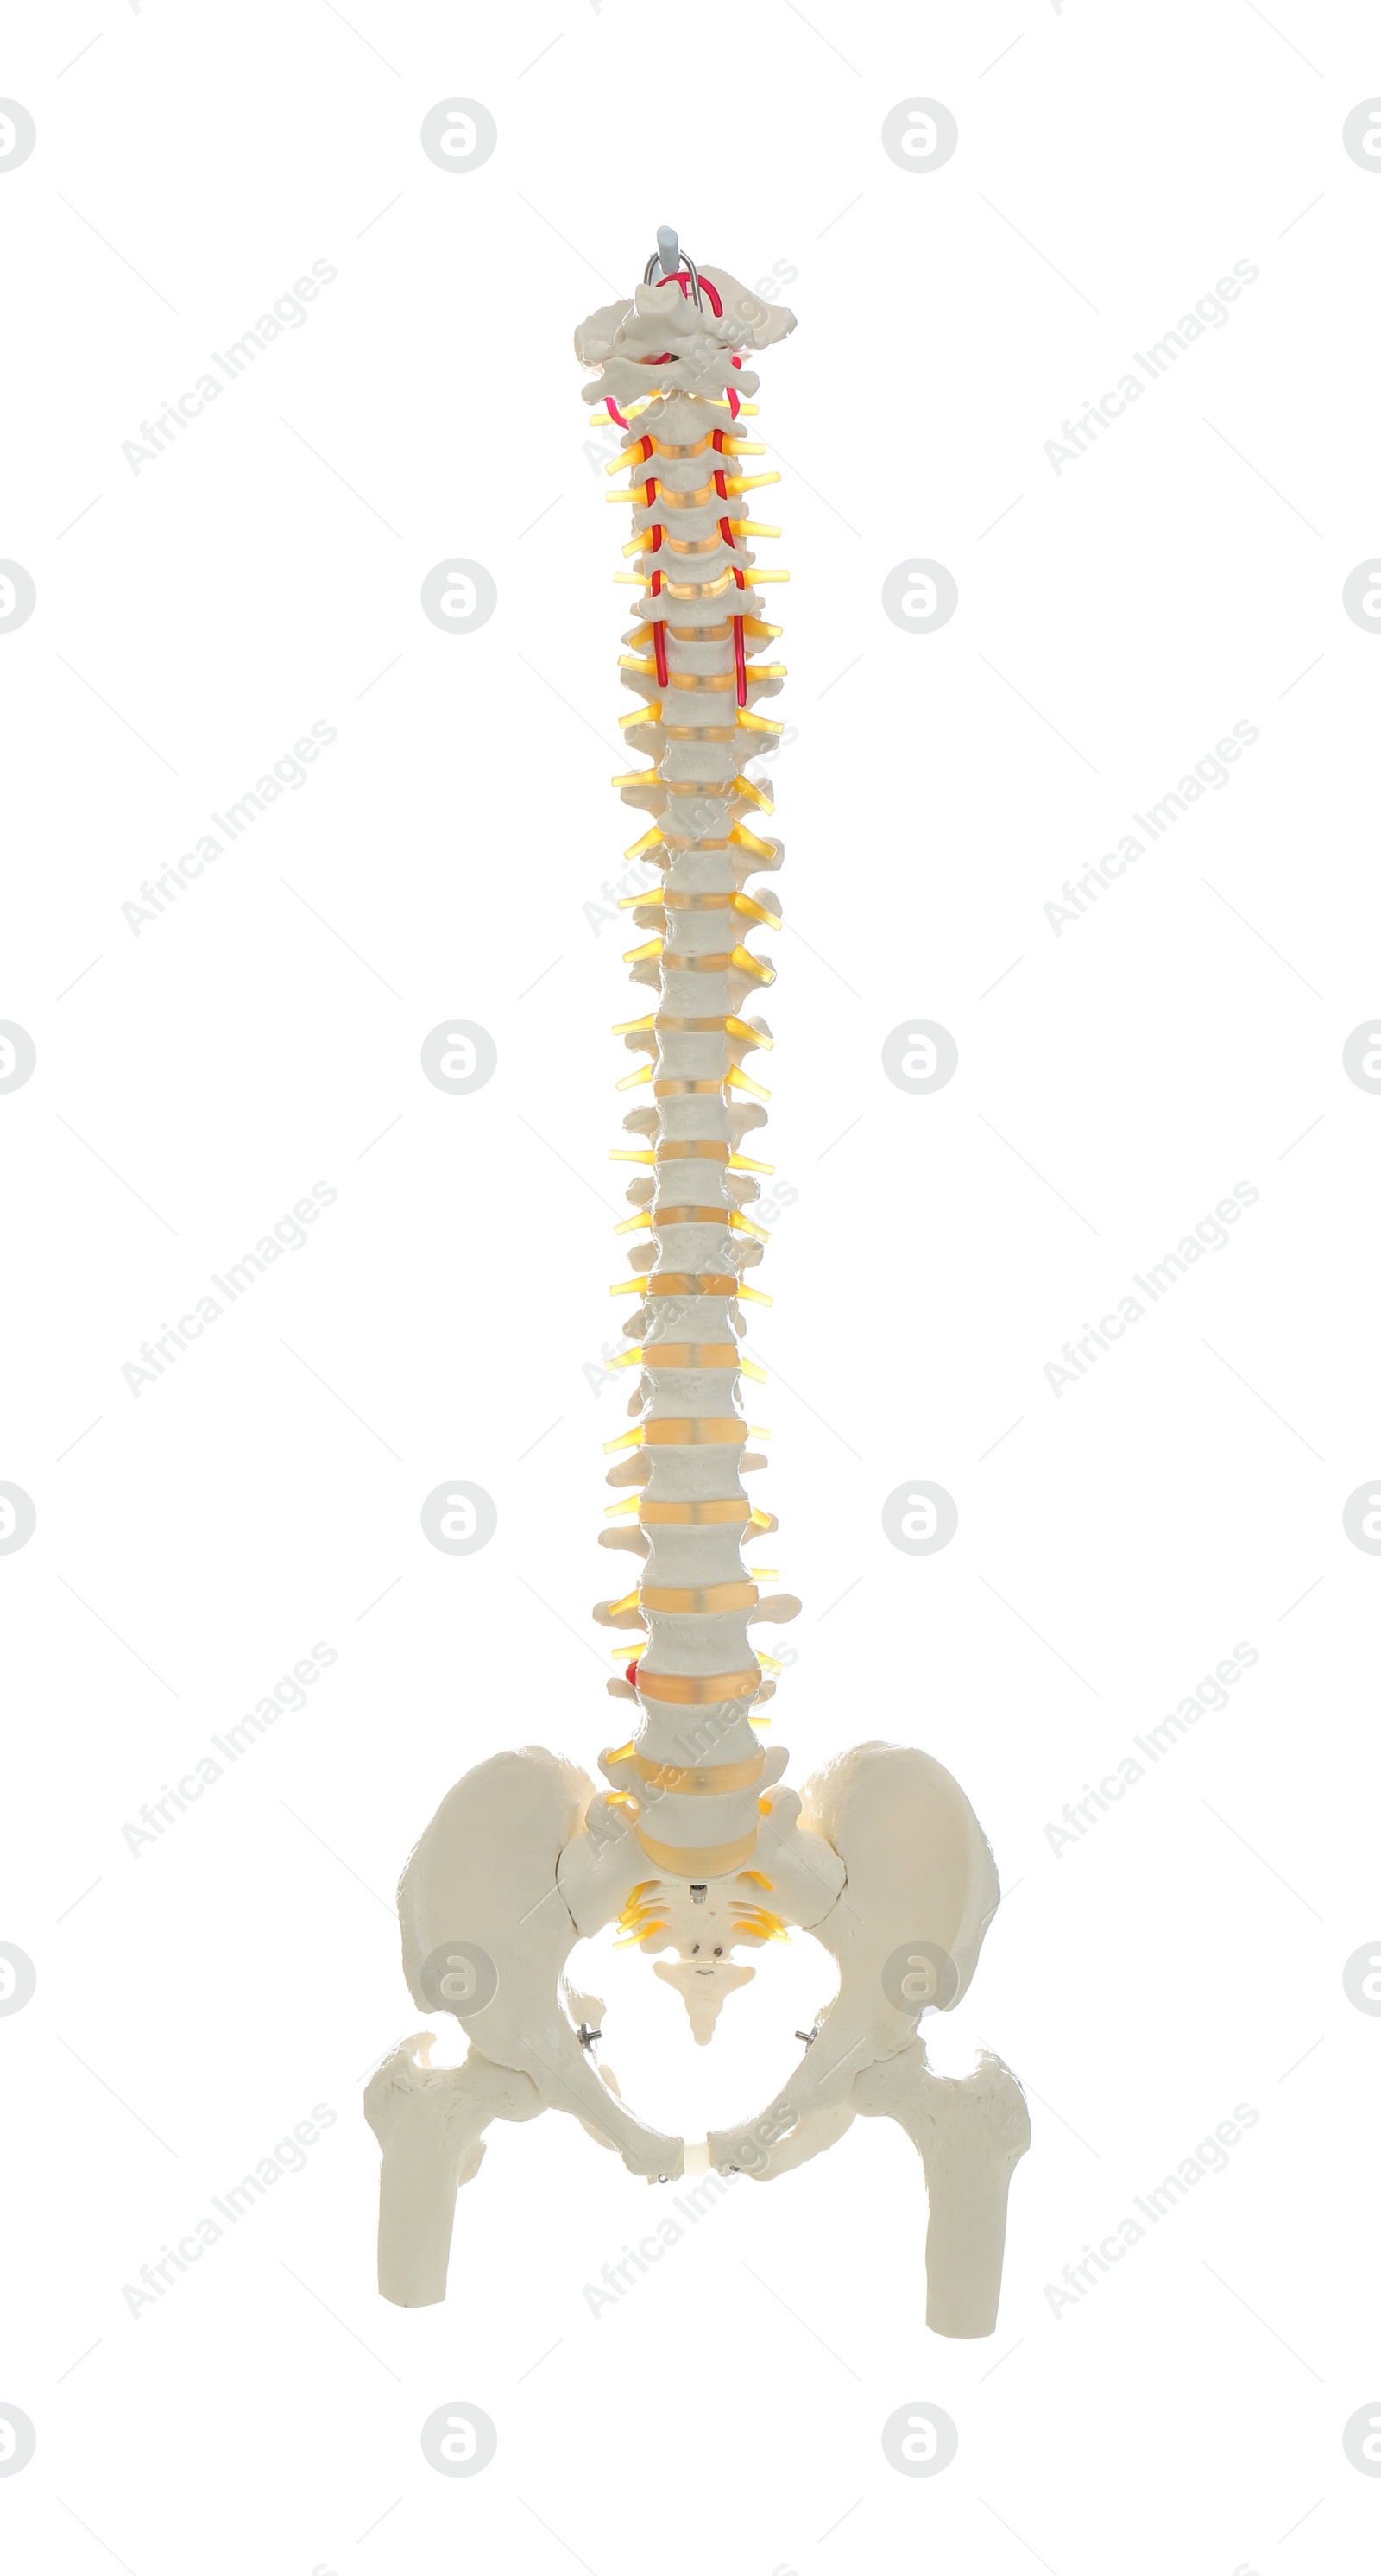 Photo of Artificial human spine model isolated on white